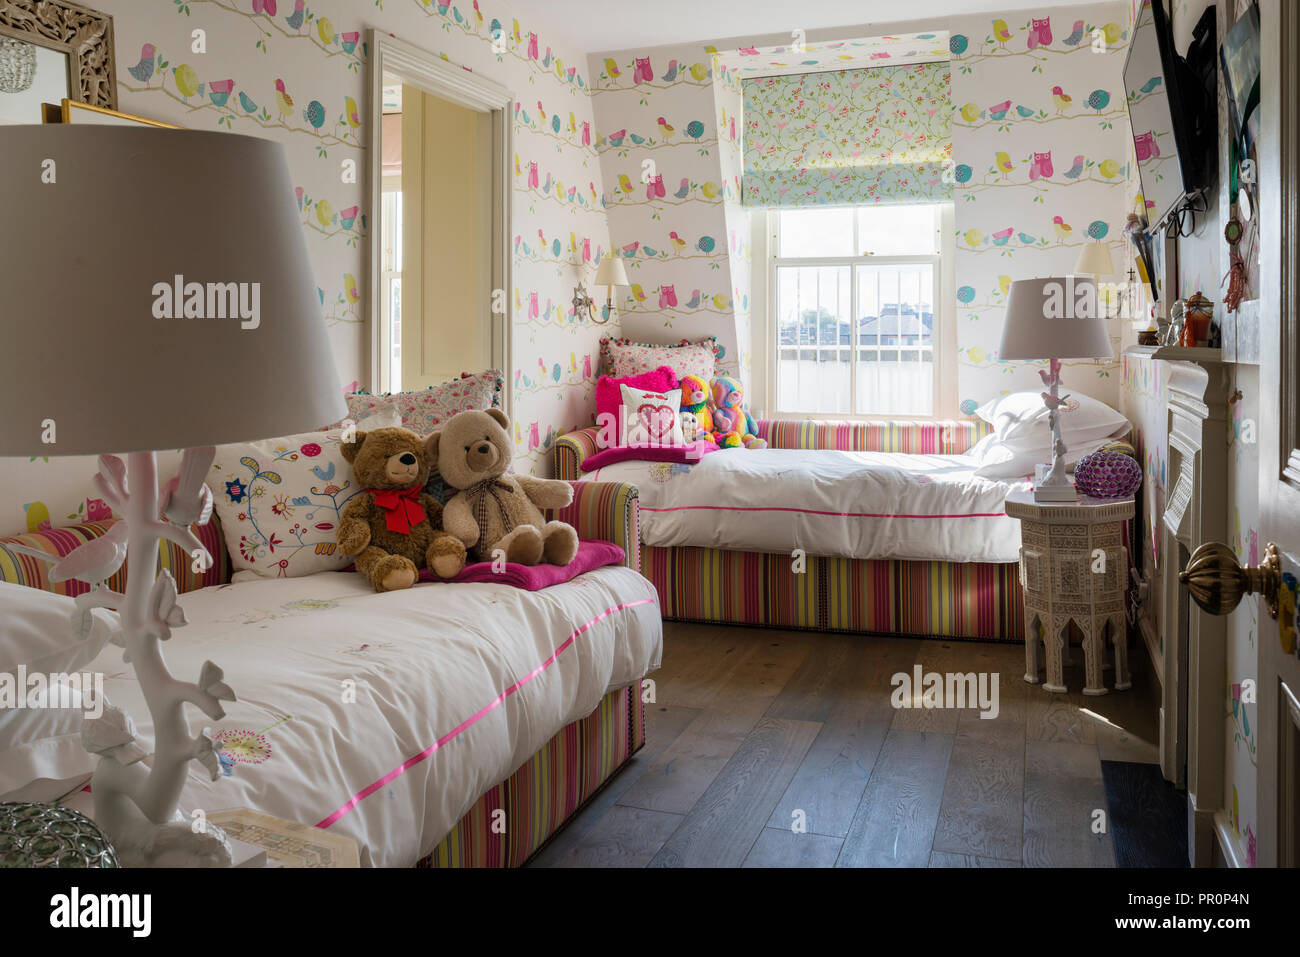 Striped daybeds with bird patterned wallpaper in girls room Stock Photo